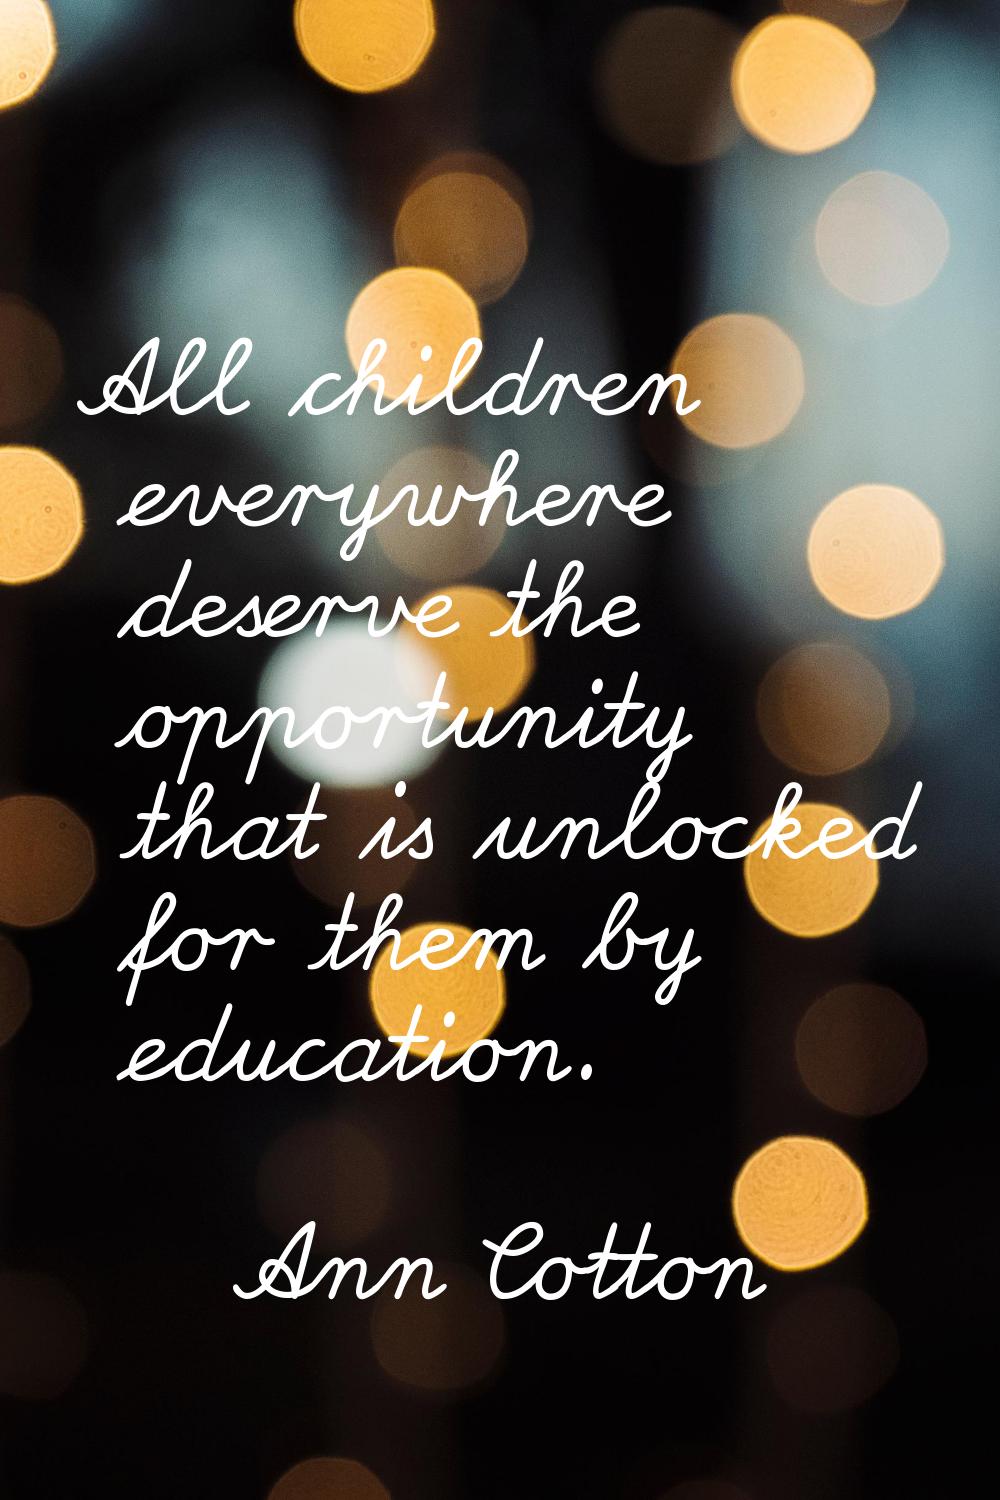 All children everywhere deserve the opportunity that is unlocked for them by education.